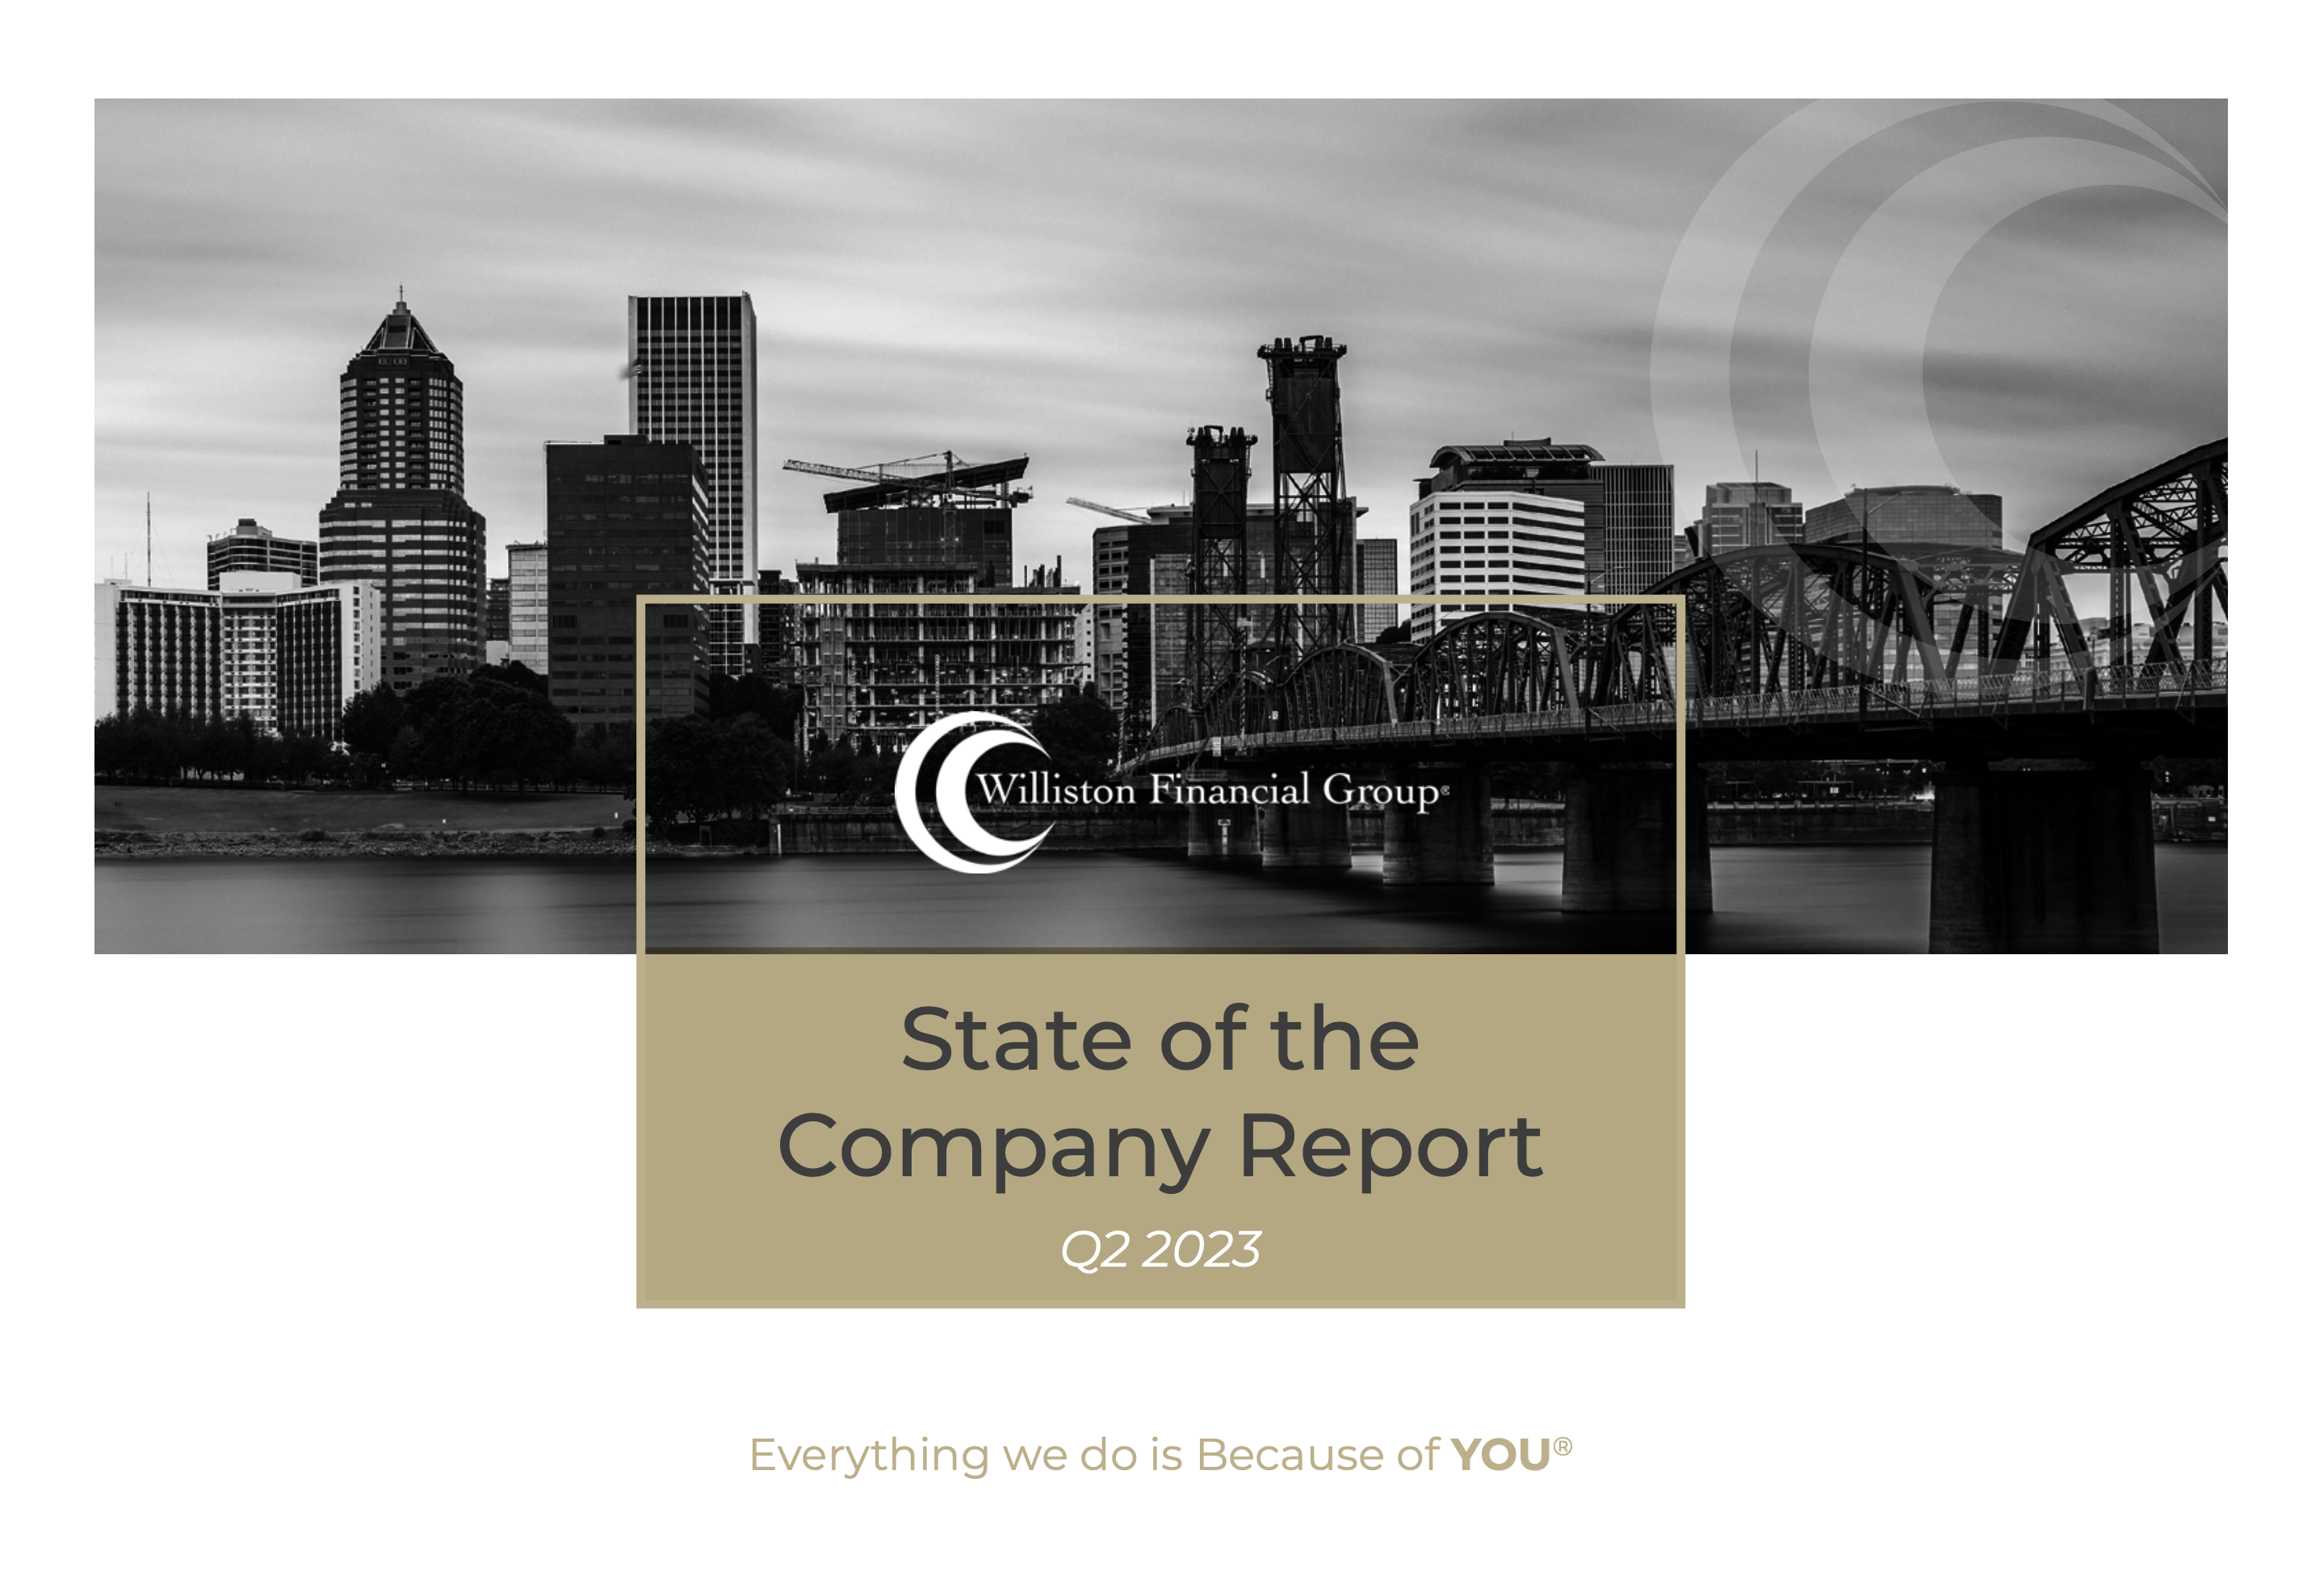 STATE OF THE COMPANY REPORT